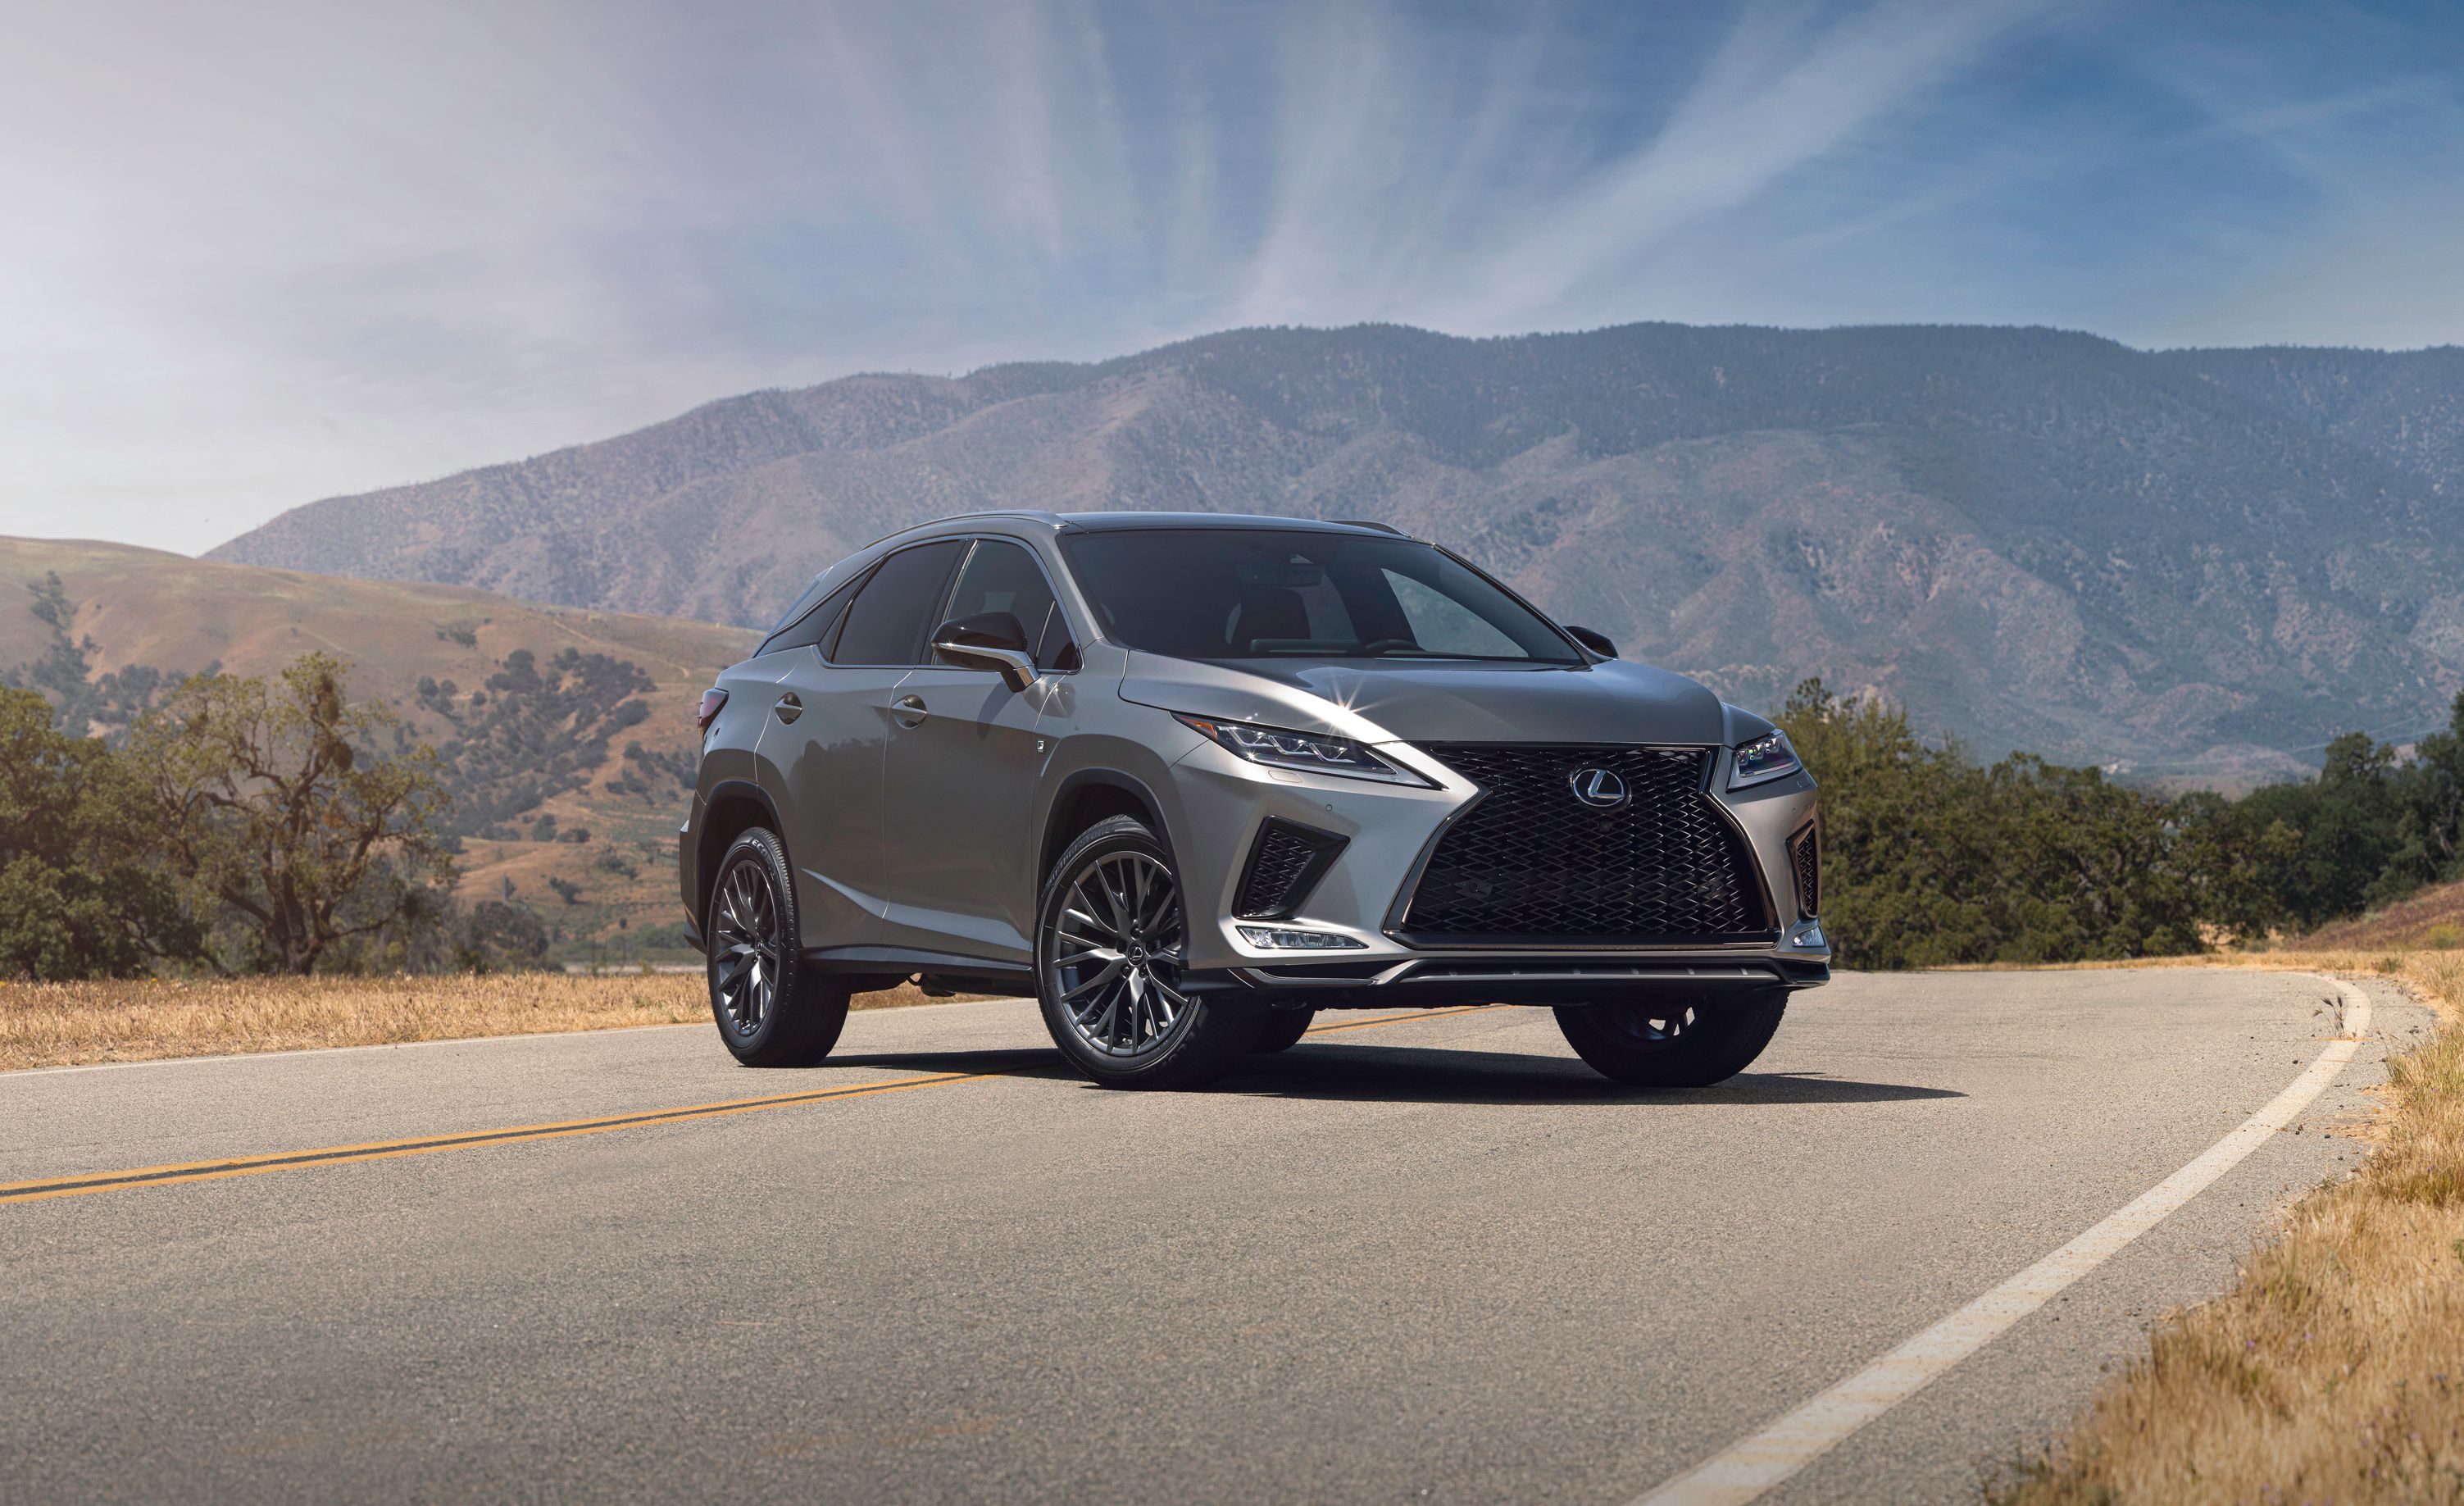 2020 Lexus RX350 and RX450h - Details of Updated Models